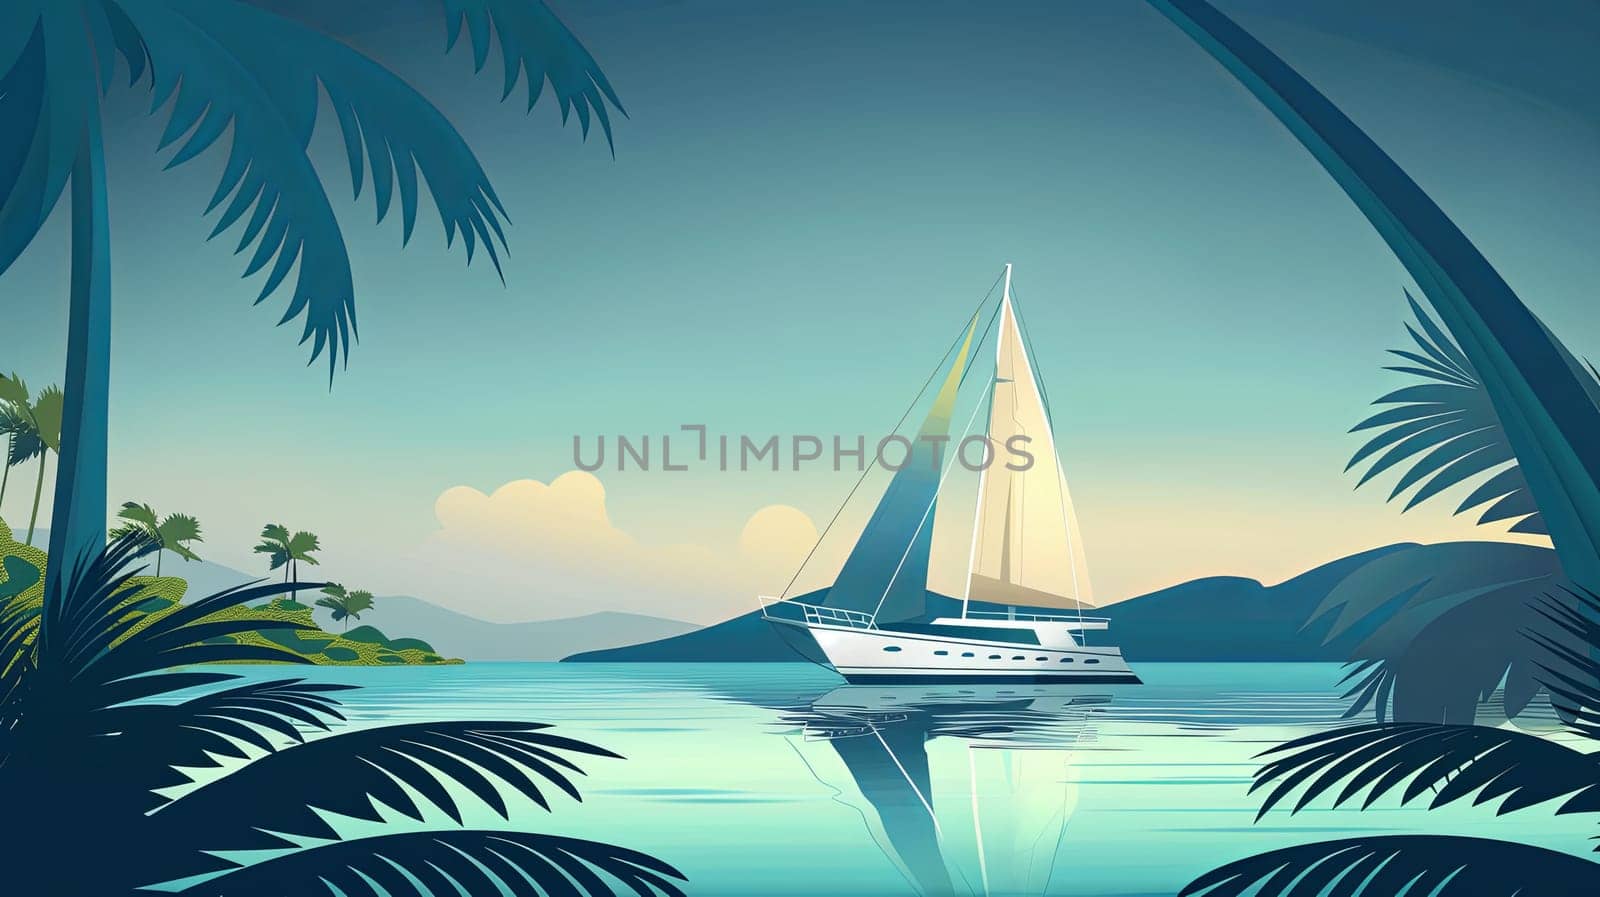 A majestic sailboat glides gracefully through calm waters, framed by lush palm trees lining the tranquil lagoon.